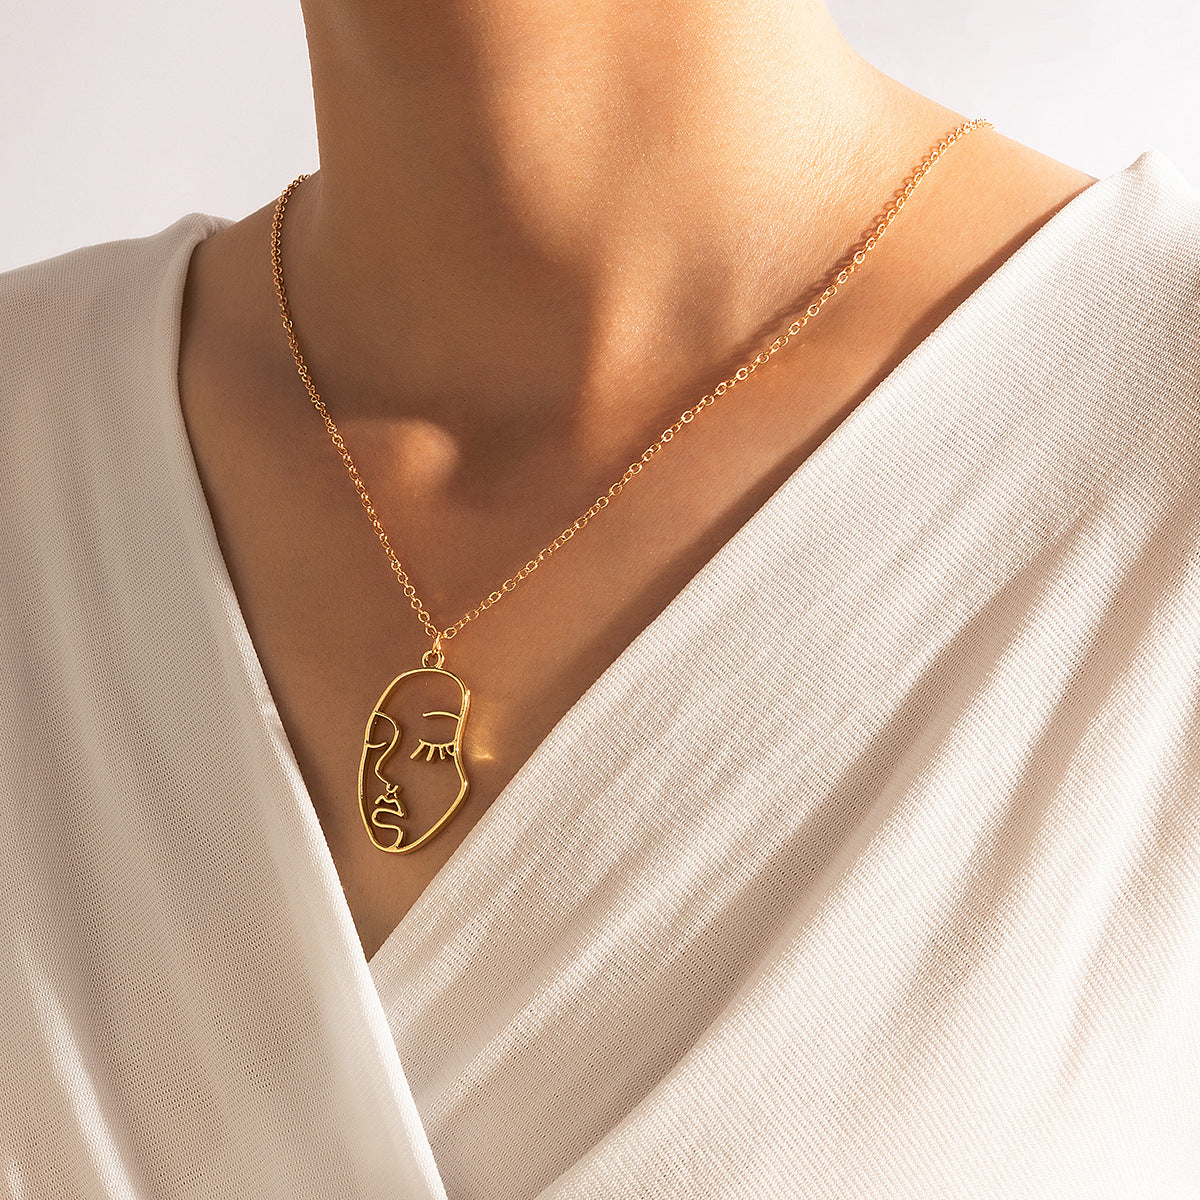 Arzonai new gold necklace European and American geometric simple personality face pendant stacked necklace single layer